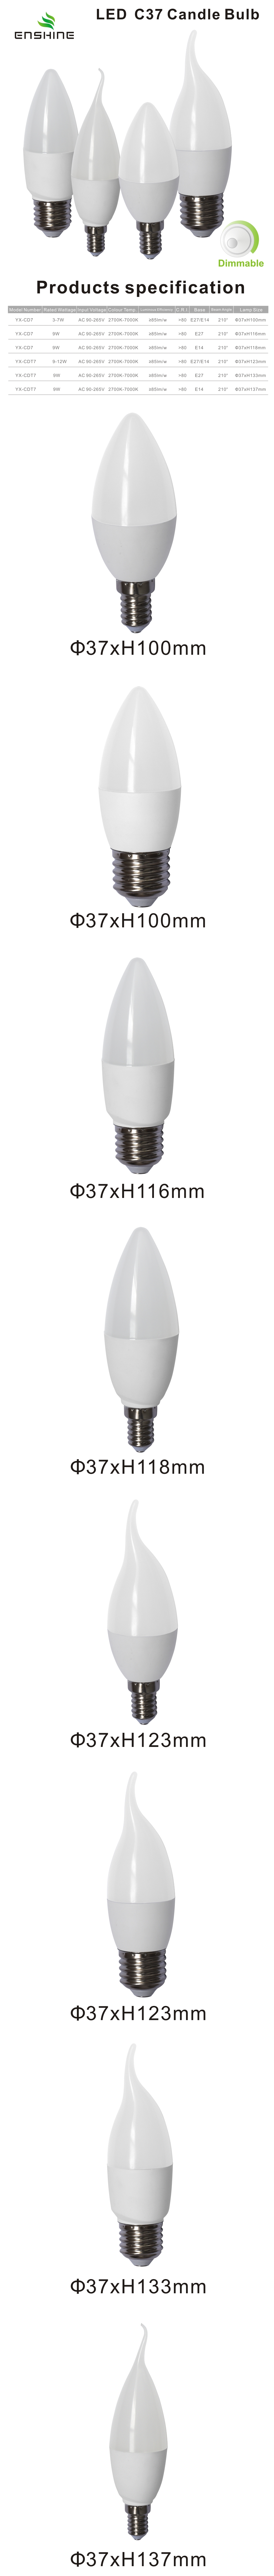 3W - 7W White dimmable led candle lights